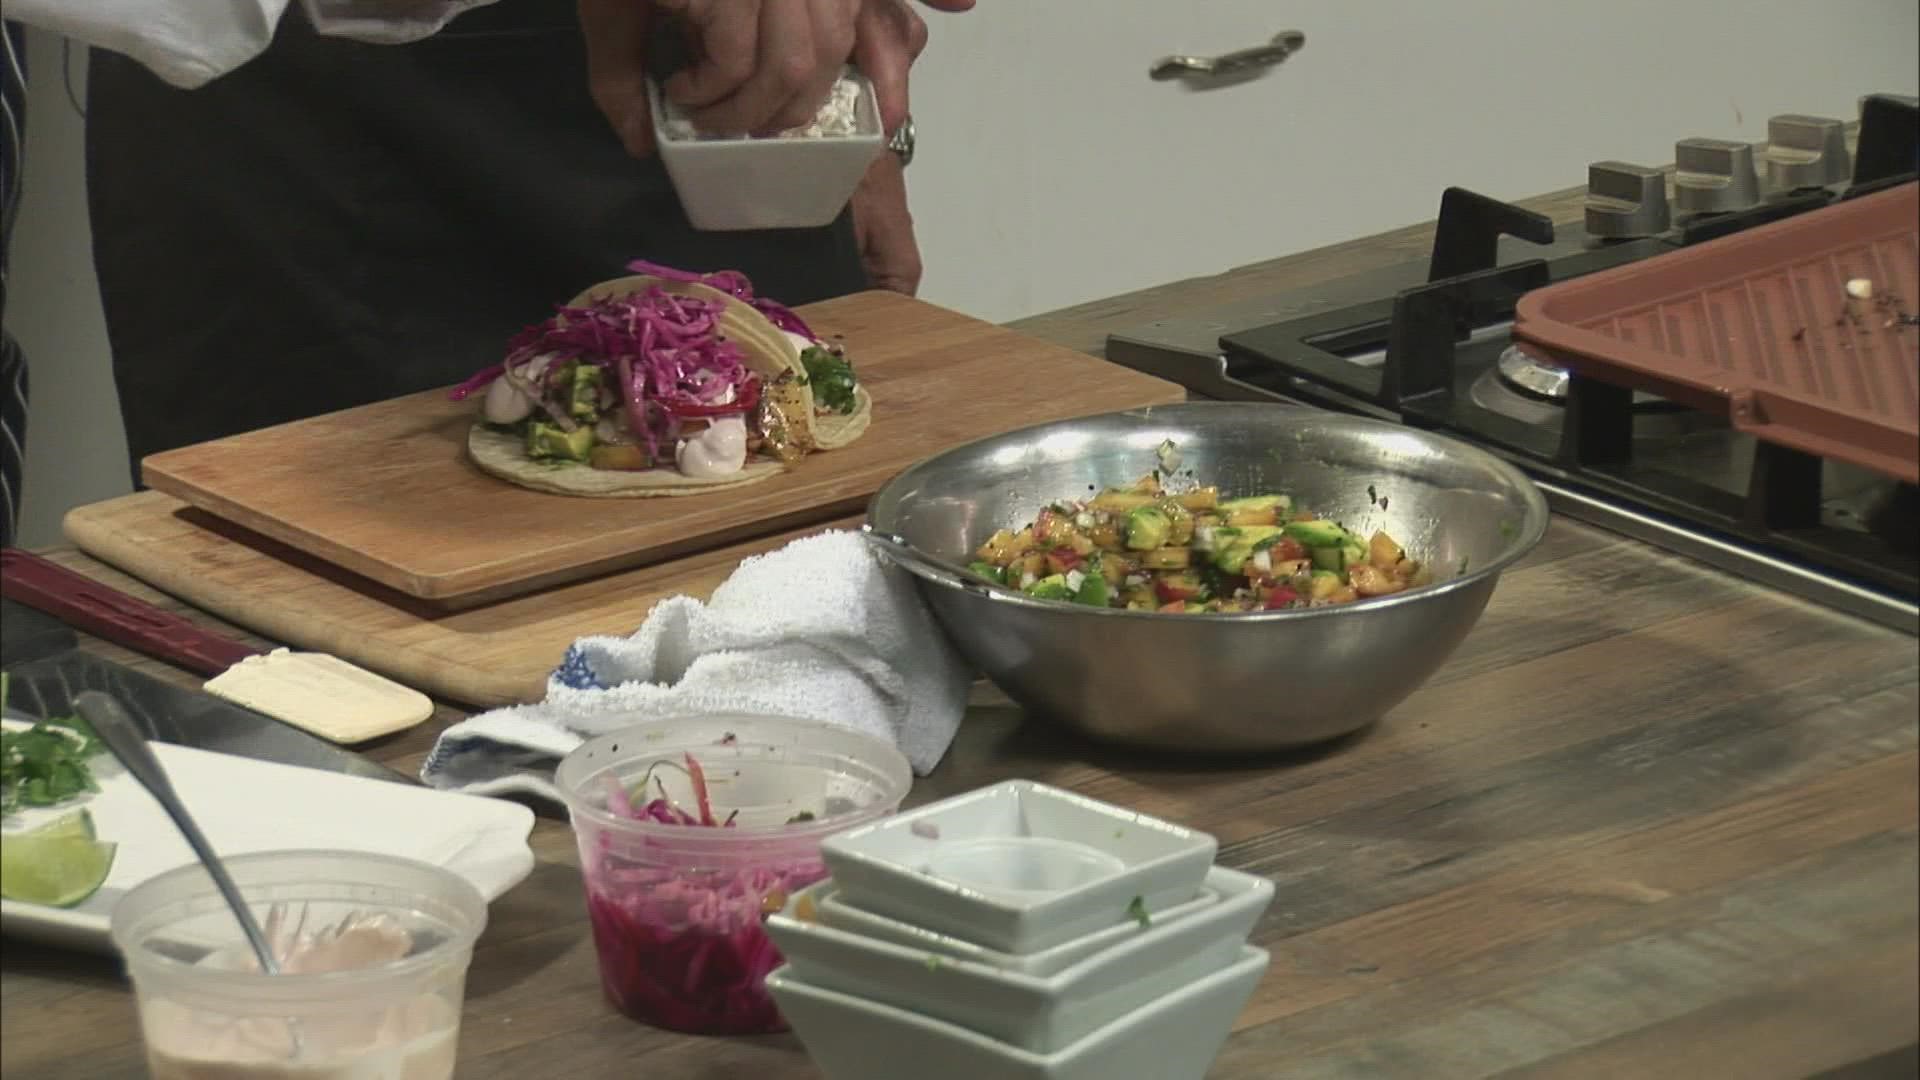 Chef David Turin shares his recipe for fish tacos.